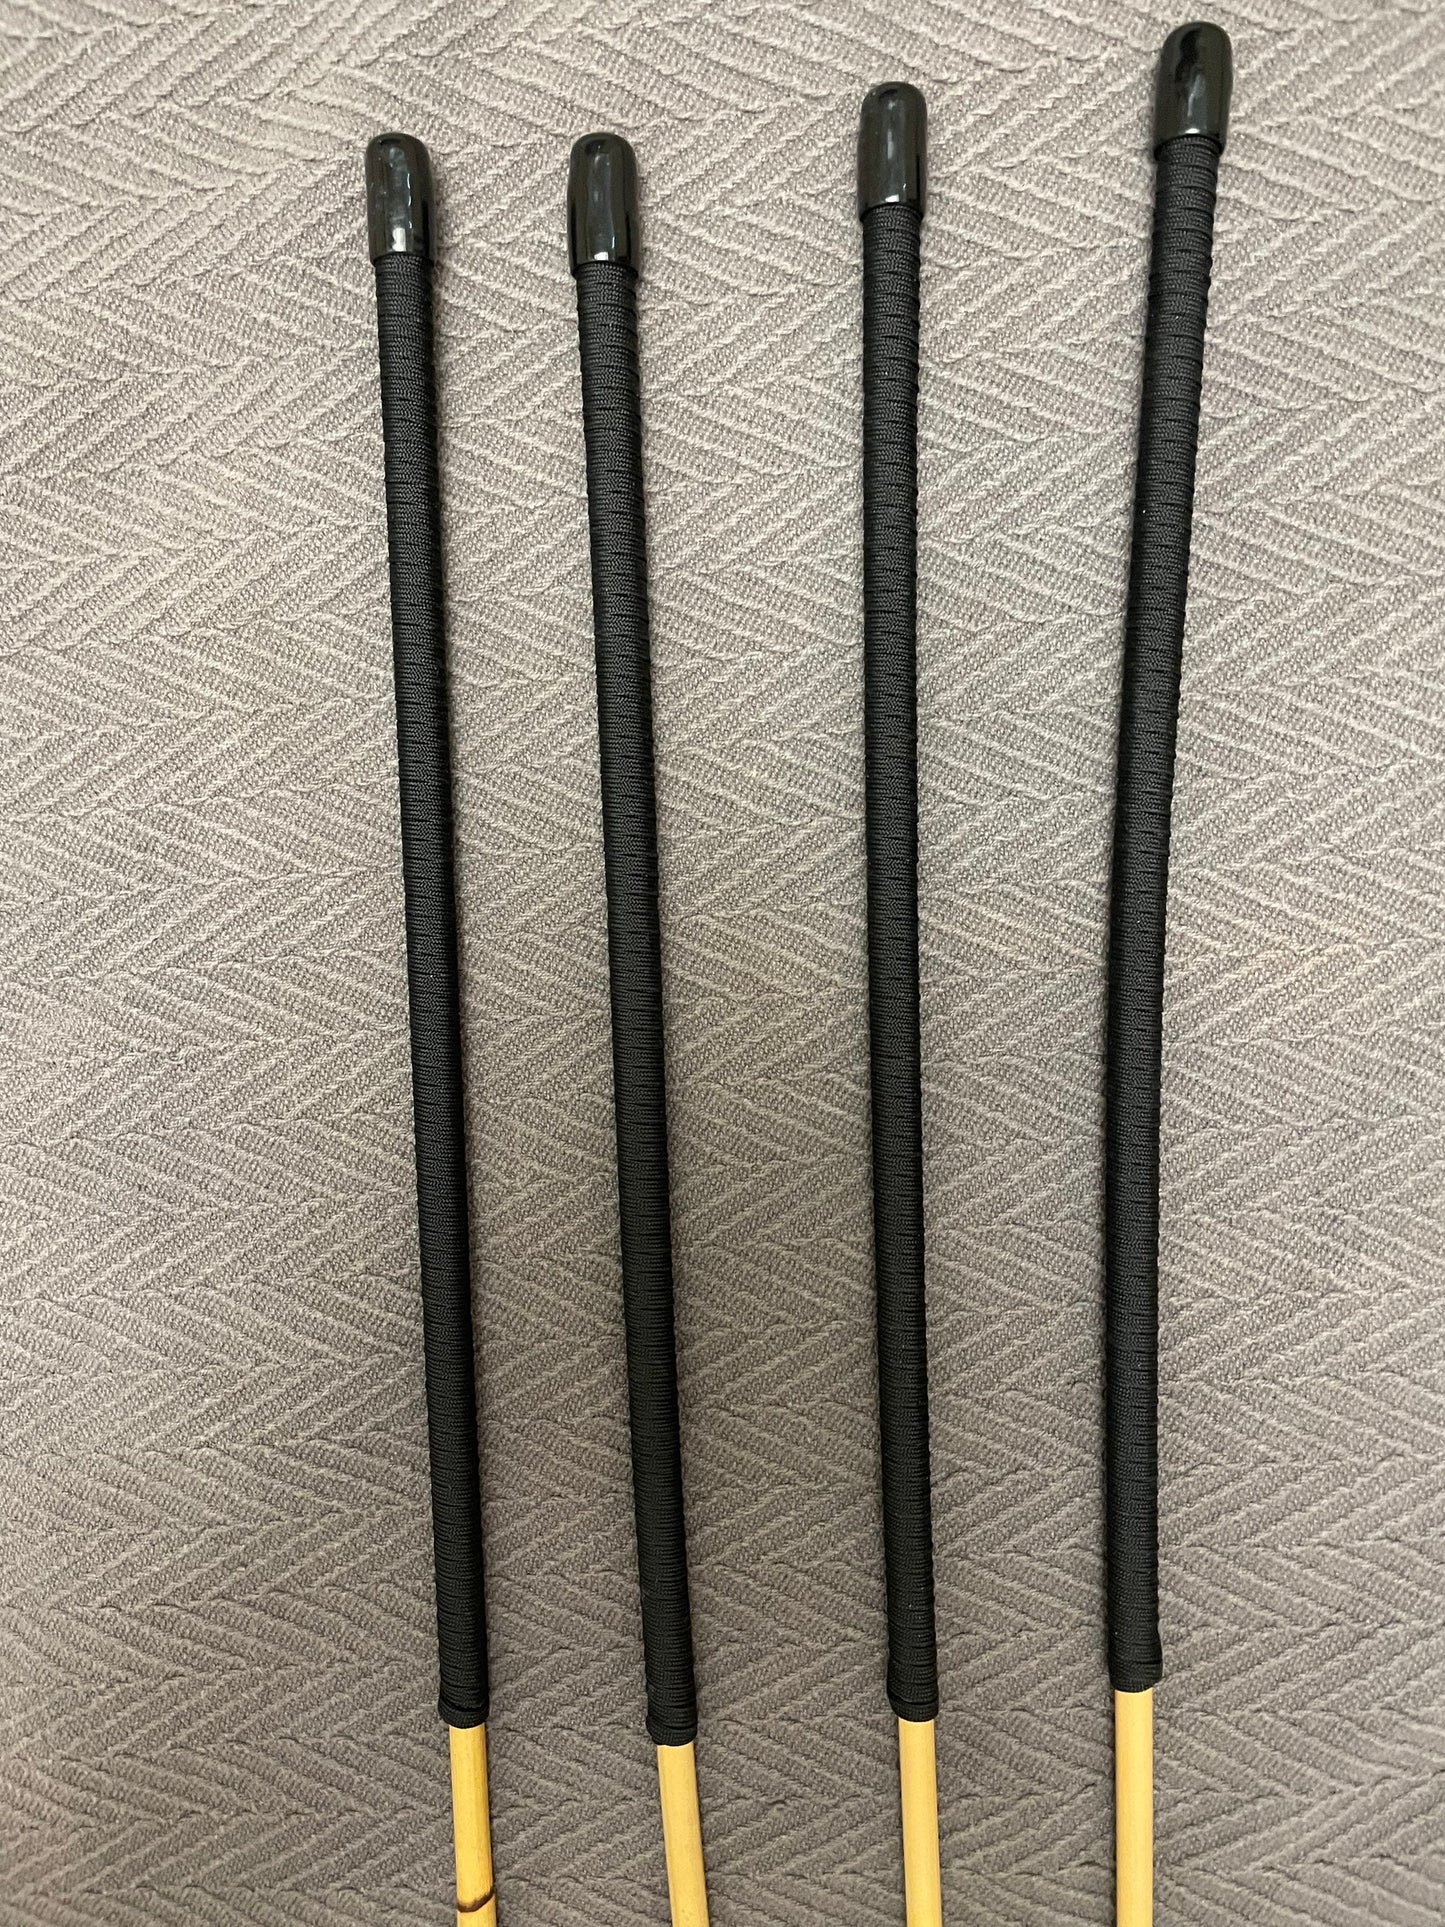 Set of 4 Very Whippy and Stingy Classic Dragon Canes - 95 cms Length - Black Paracord Handles